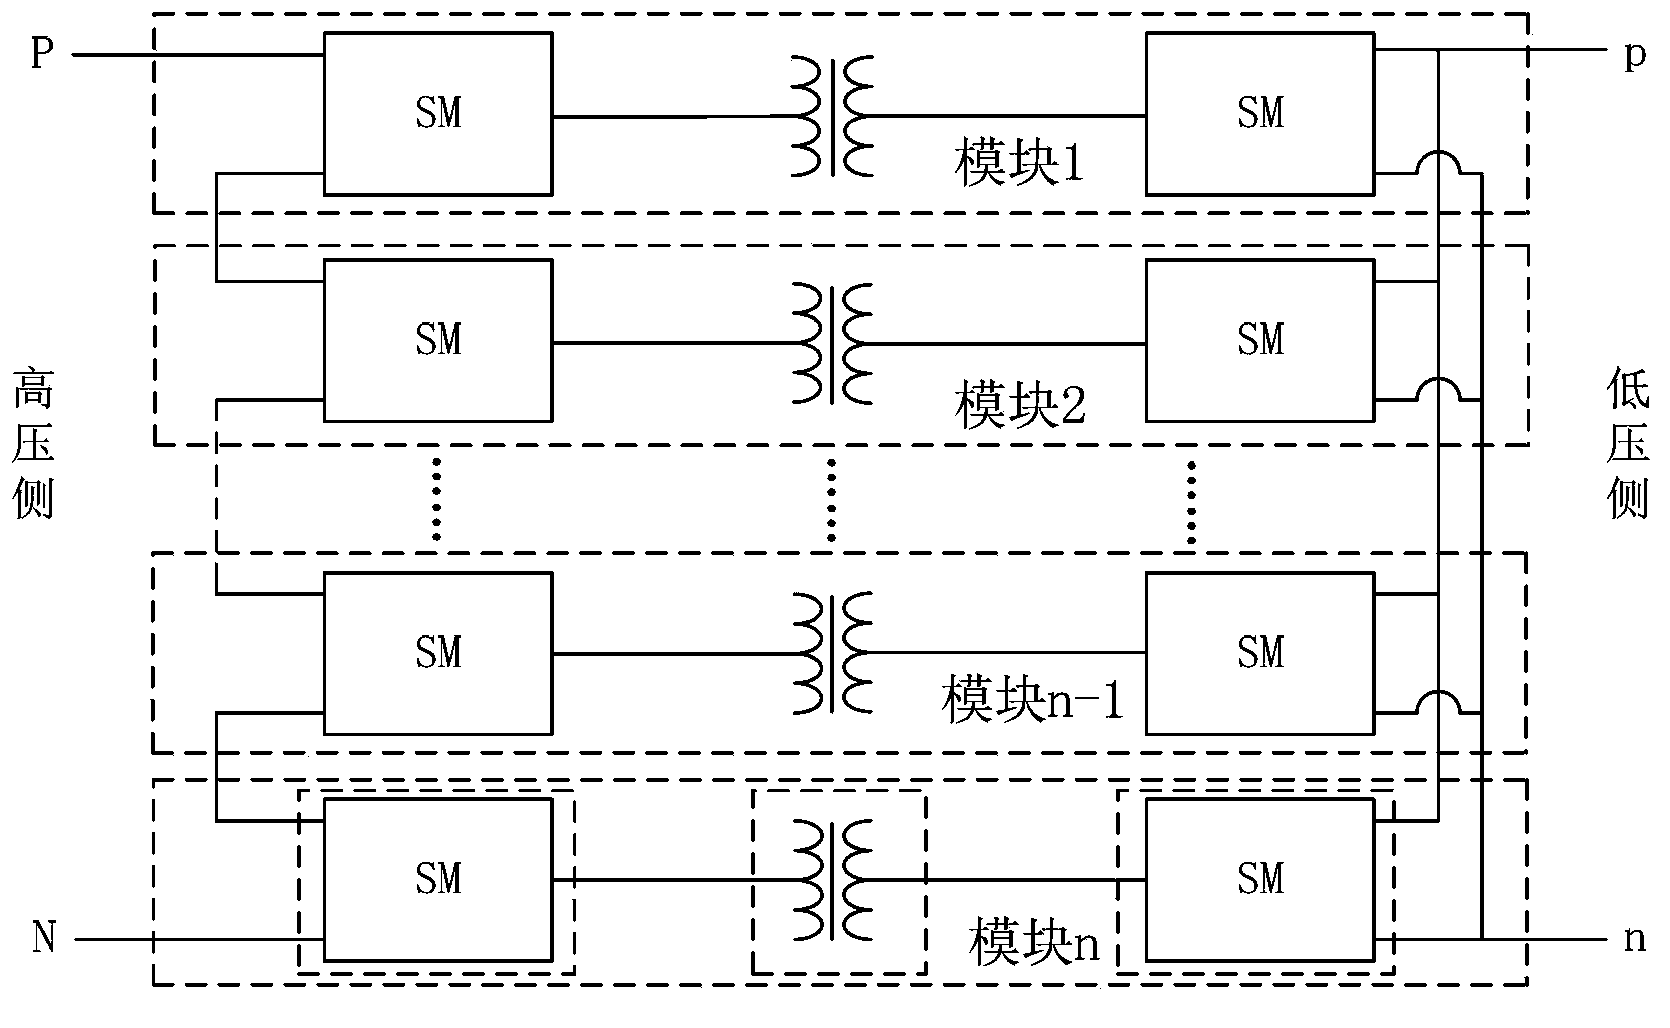 Modularized device for conversion between high-voltage direct current and direct current